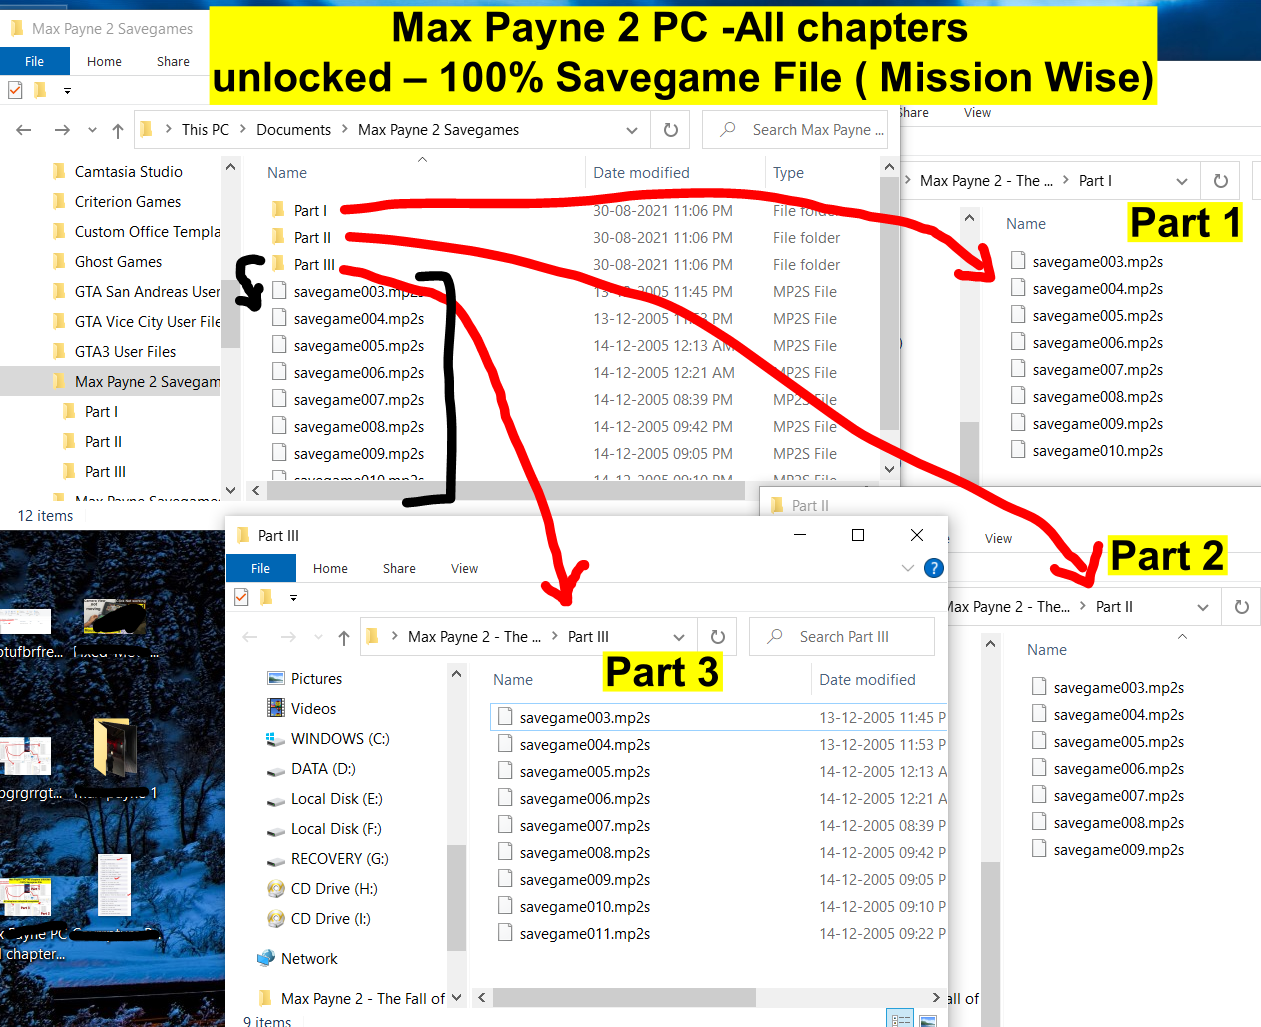 Max Payne 2 PC -All chapters (mission) unlocked - 100% Savegame File ( Mission Wise)